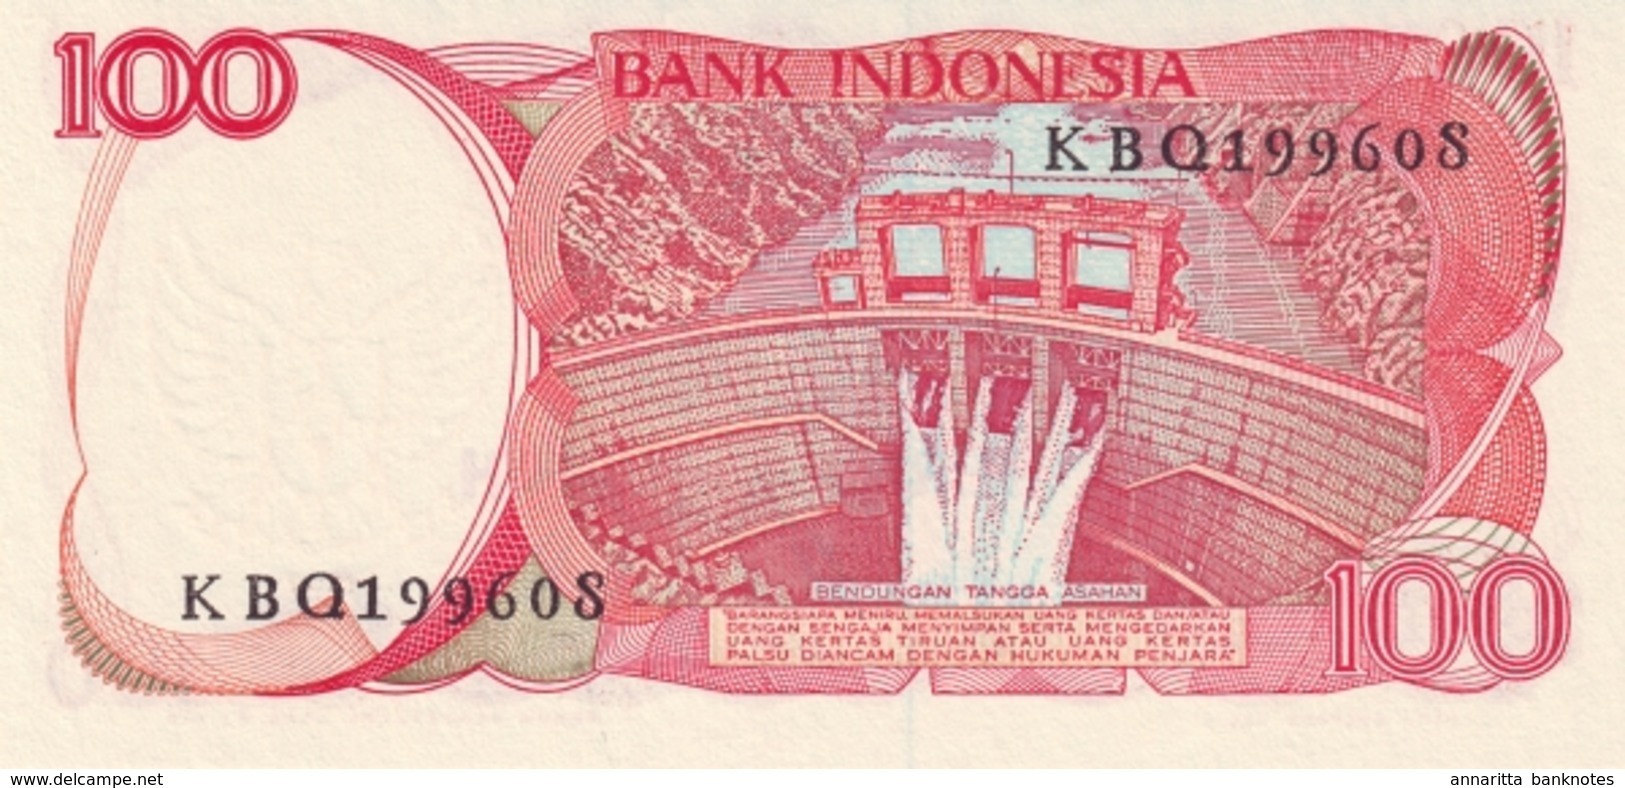 INDONESIA 100 RUPIAH 1984 P-122b UNC   LITHOGRAPHED [ID580b] - Indonesia